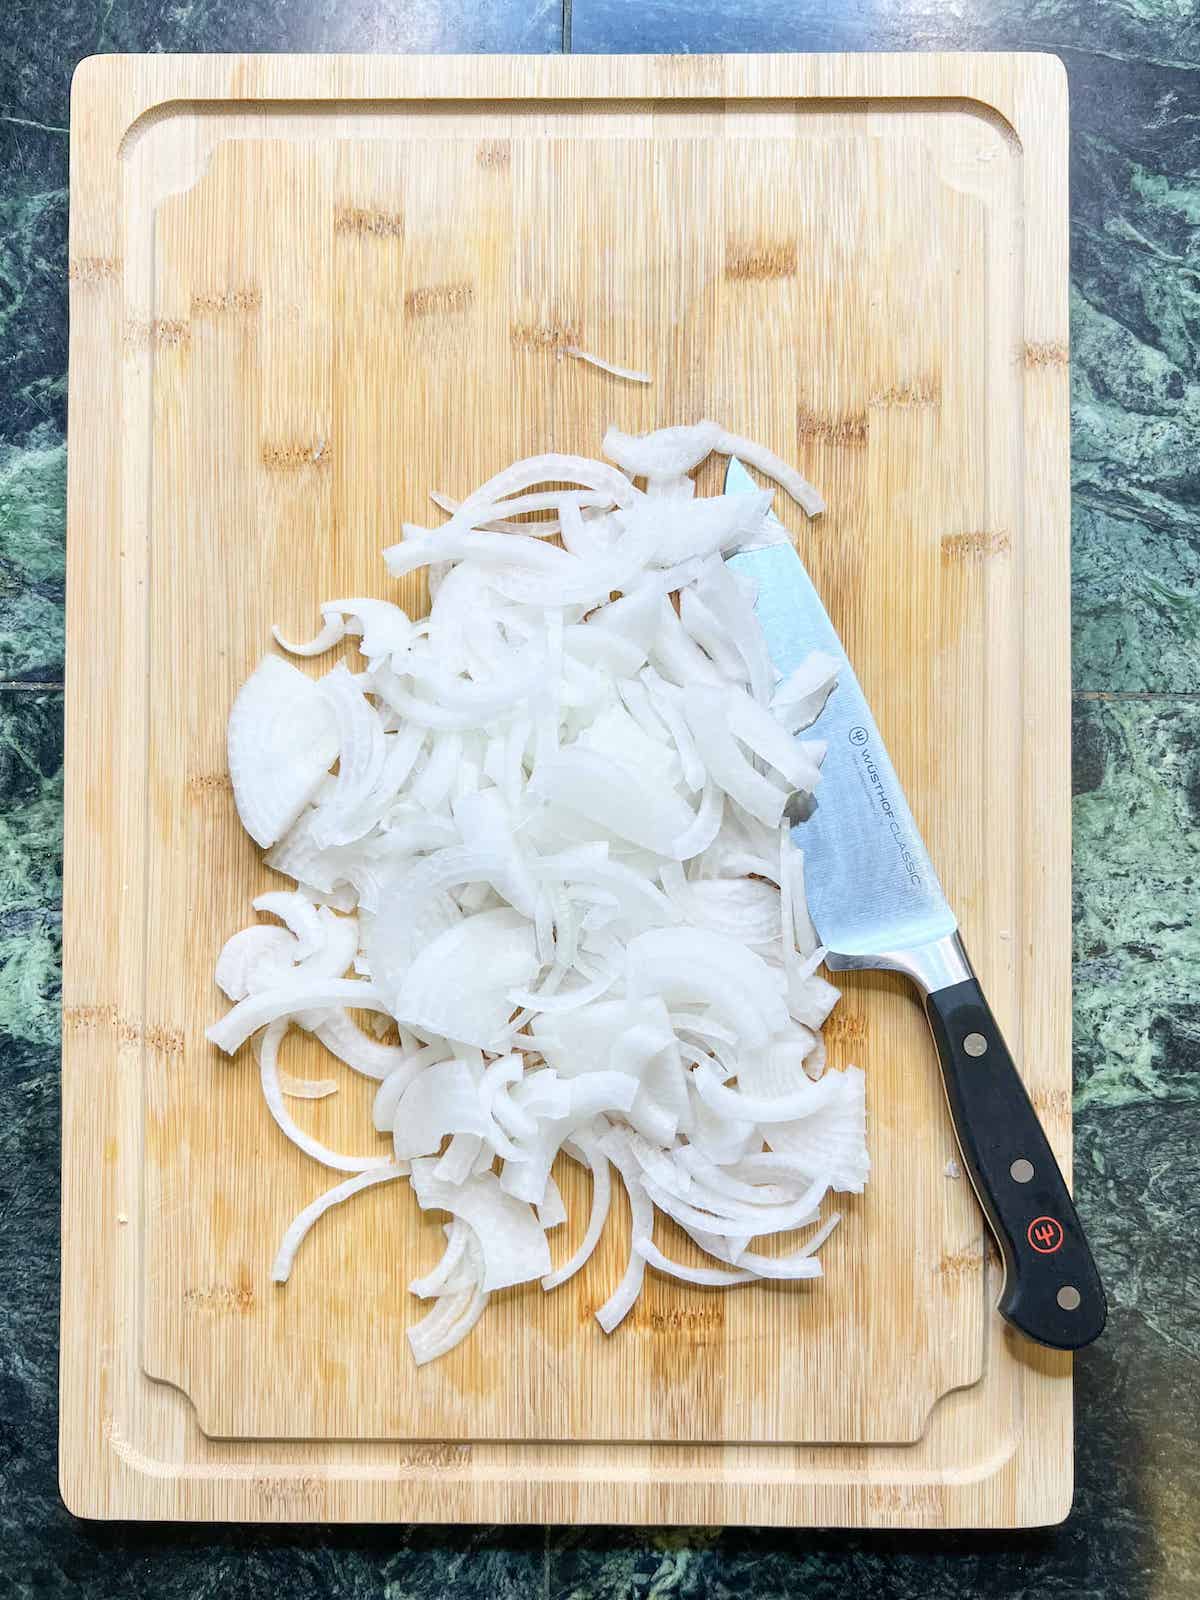 Thinly sliced white onion on a wood cutting board with a chef's knife.